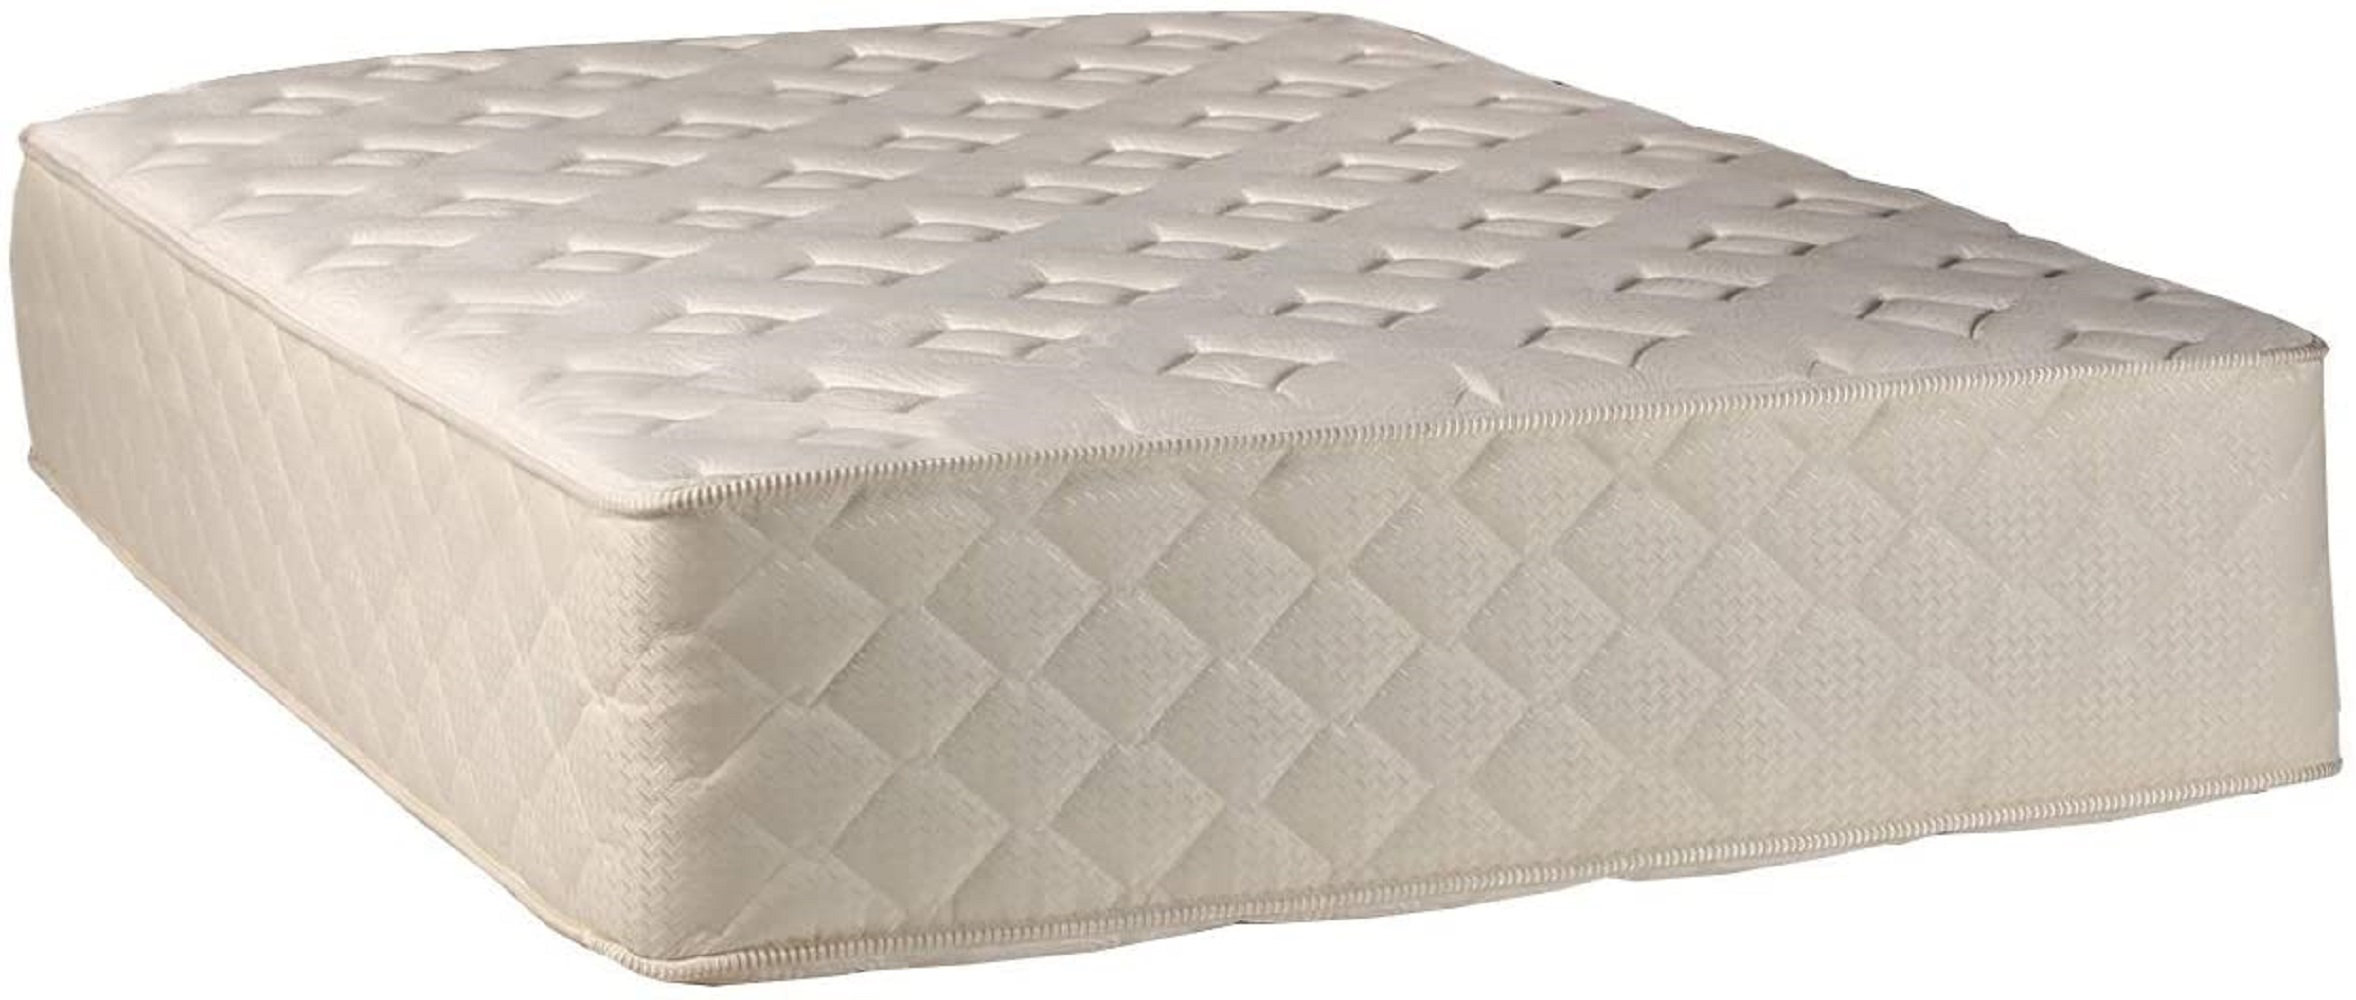 High quality all sizes! Firm luxury orthopaedic mattress on special price